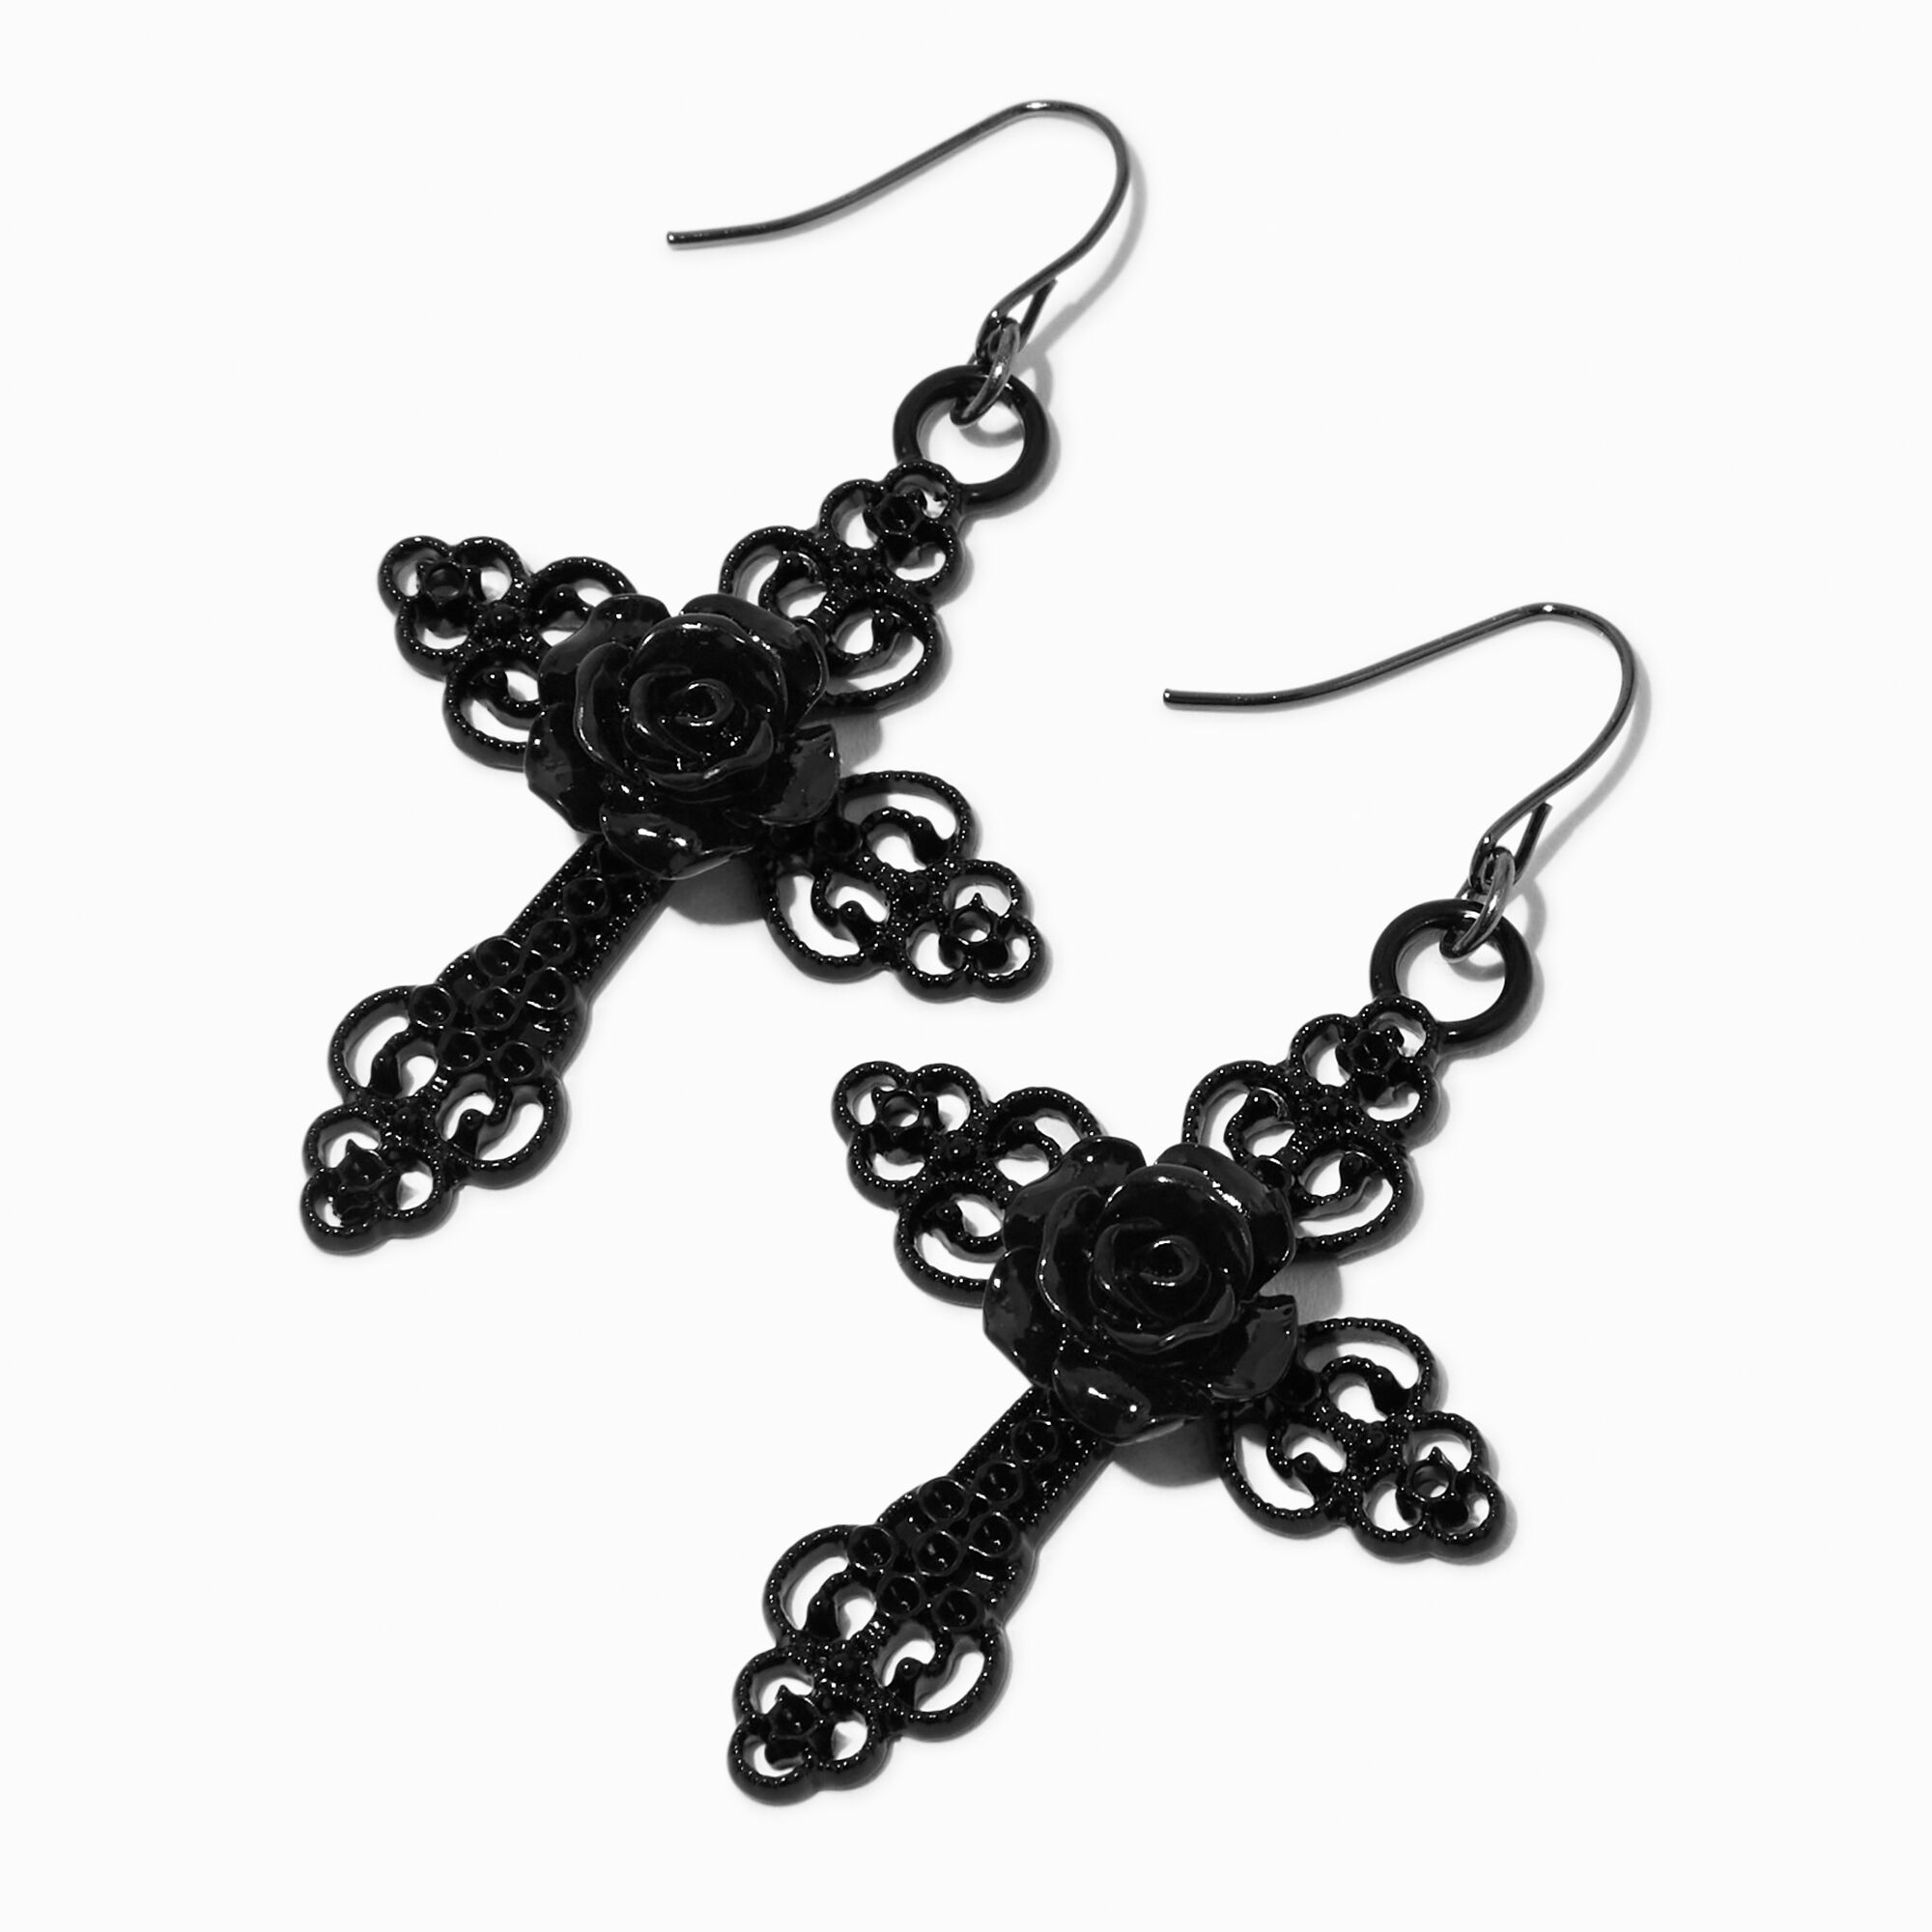 View Claires Rose Cross 2 Drop Earrings Black information